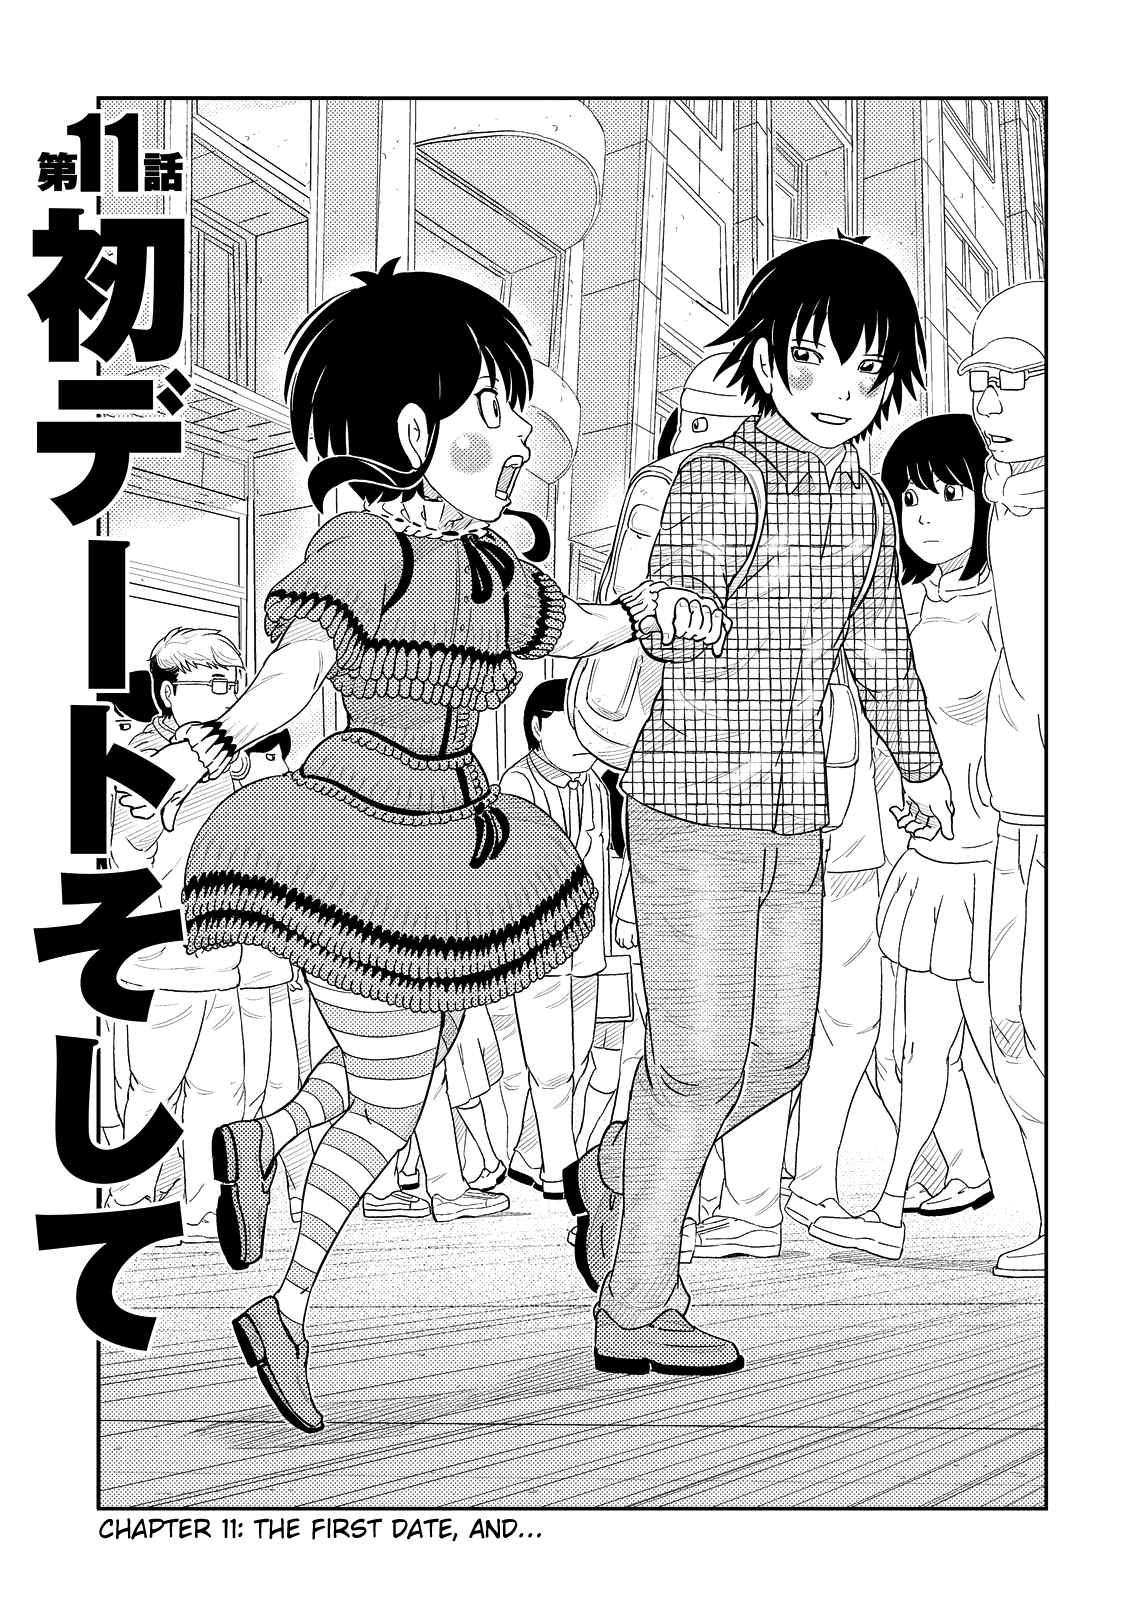 Kaiten One Vol. 2 Ch. 11 The First Date, and...